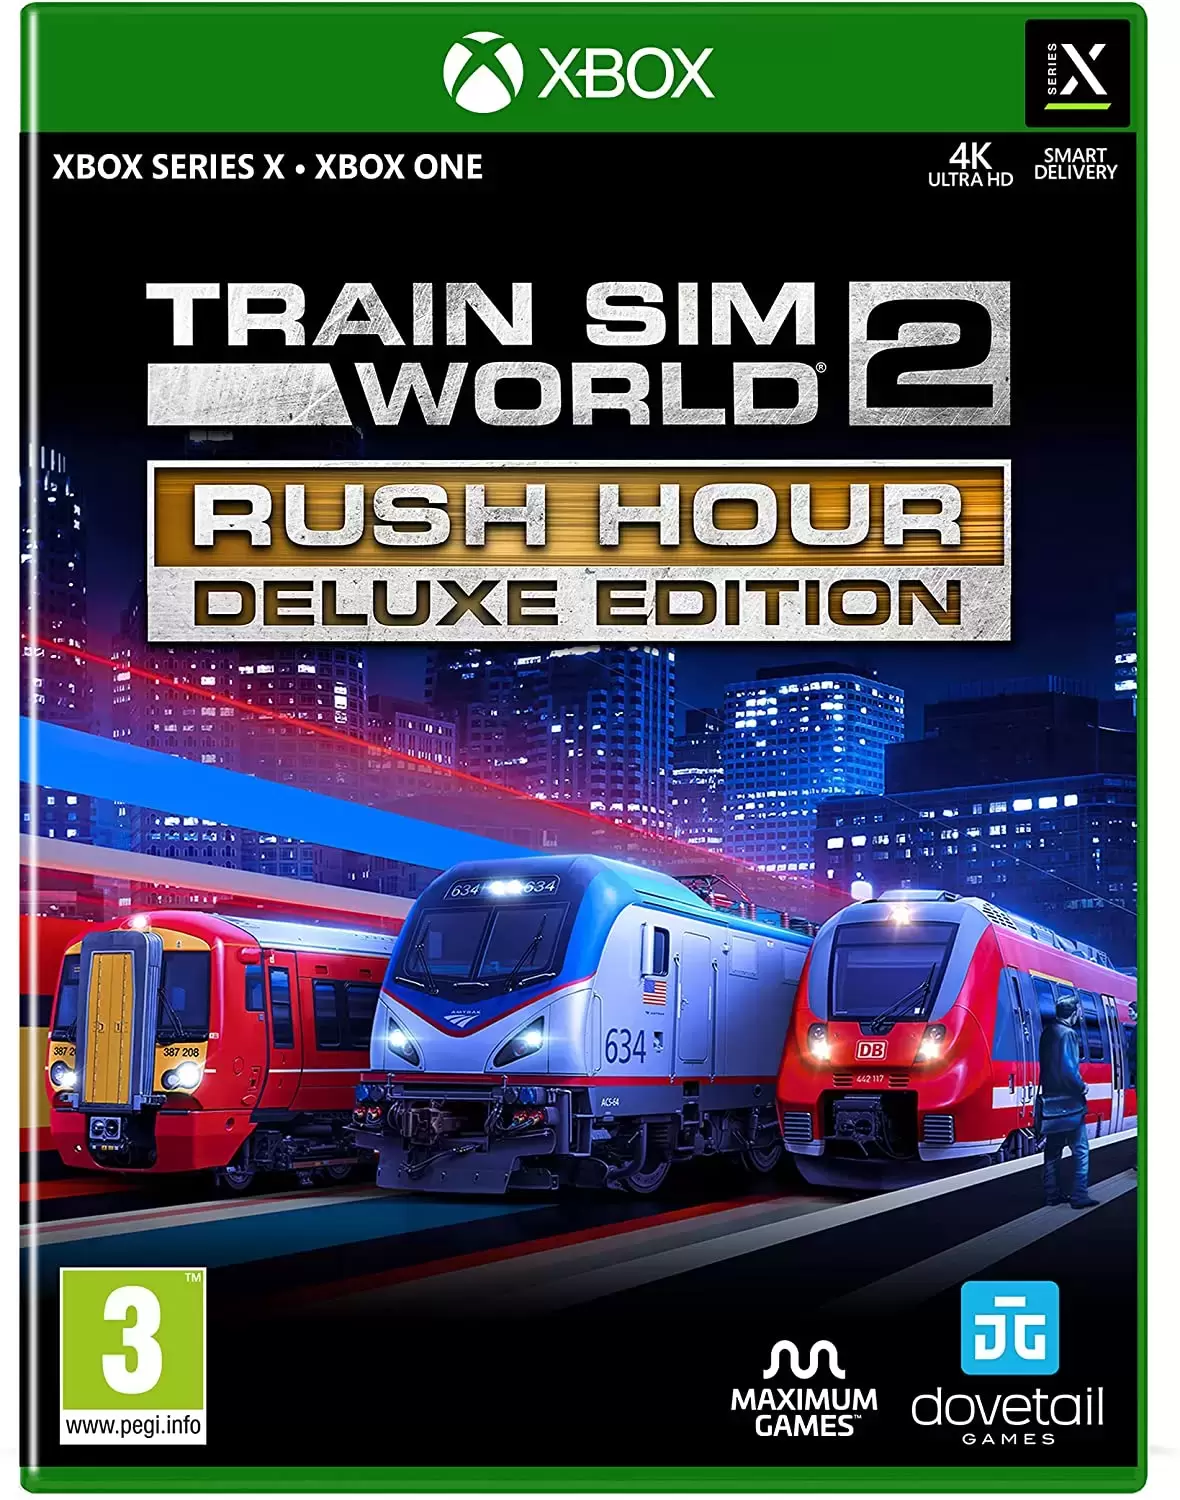 XBOX One Games - Train Sim World 21 - Rush Hour Deluxe Edition